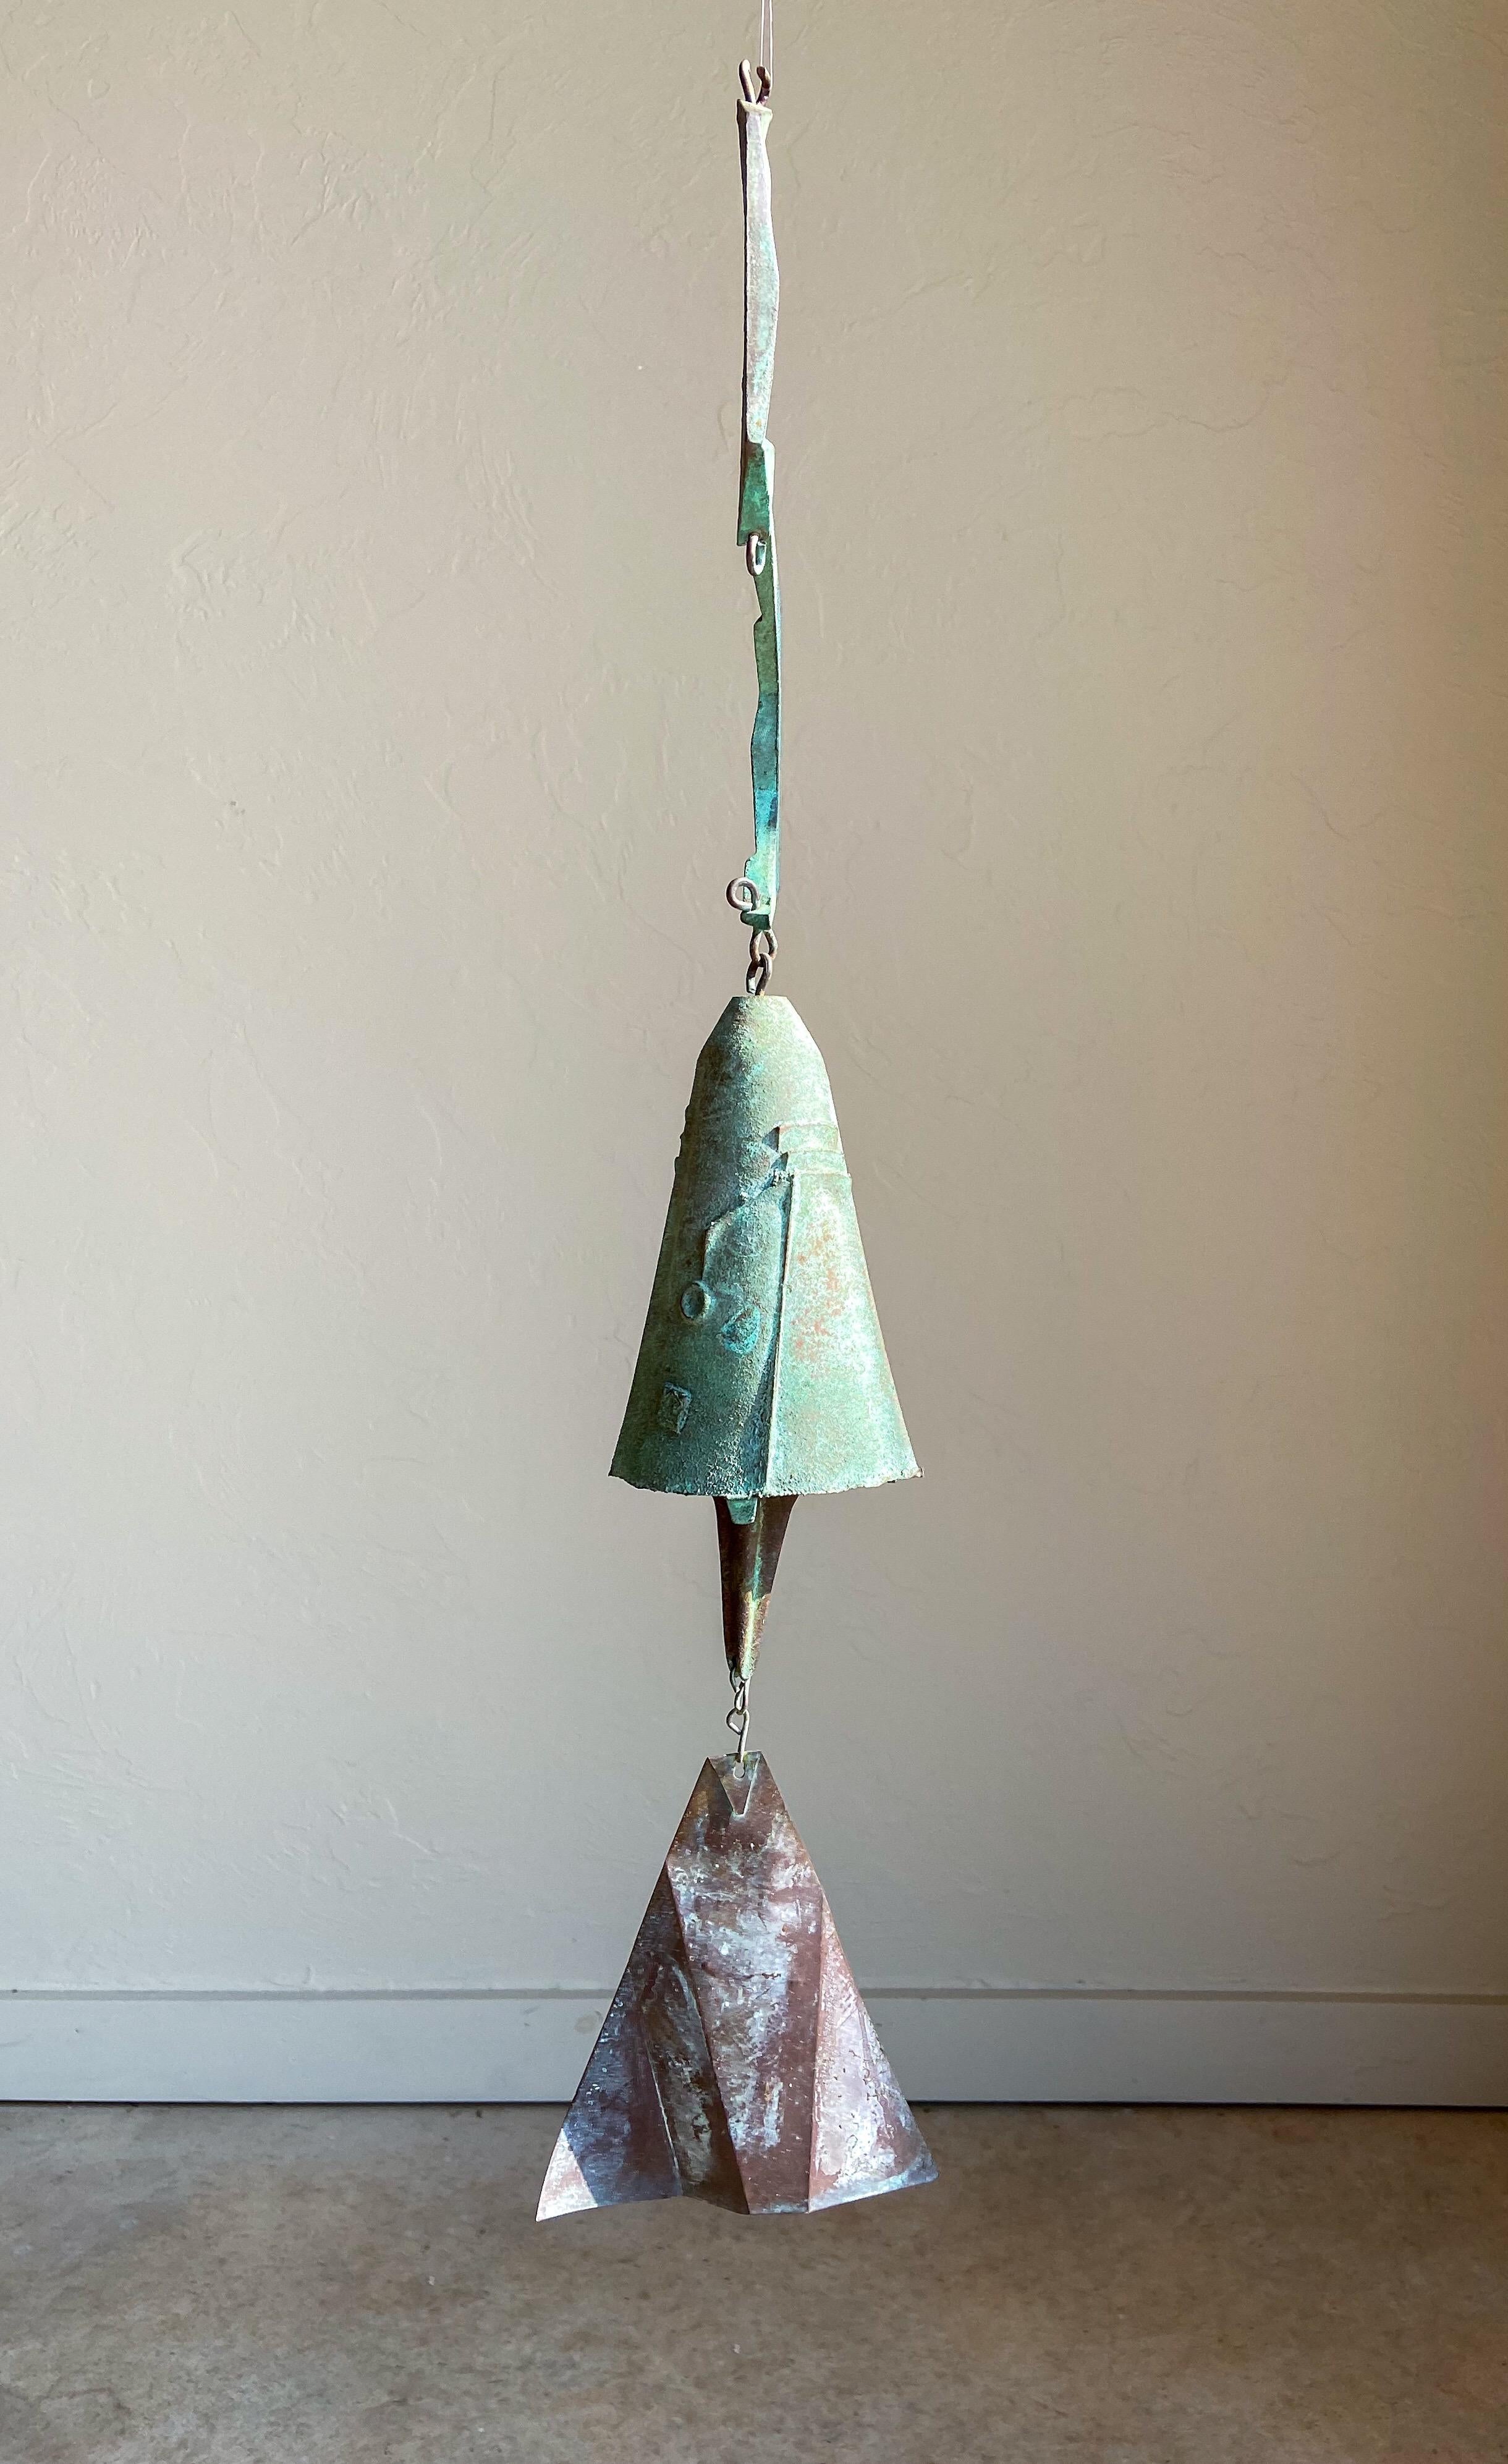 A cast bronze wind bell by Paolo Soleri. A functional piece of art with a wonderful patina and a beautiful sounding chime.